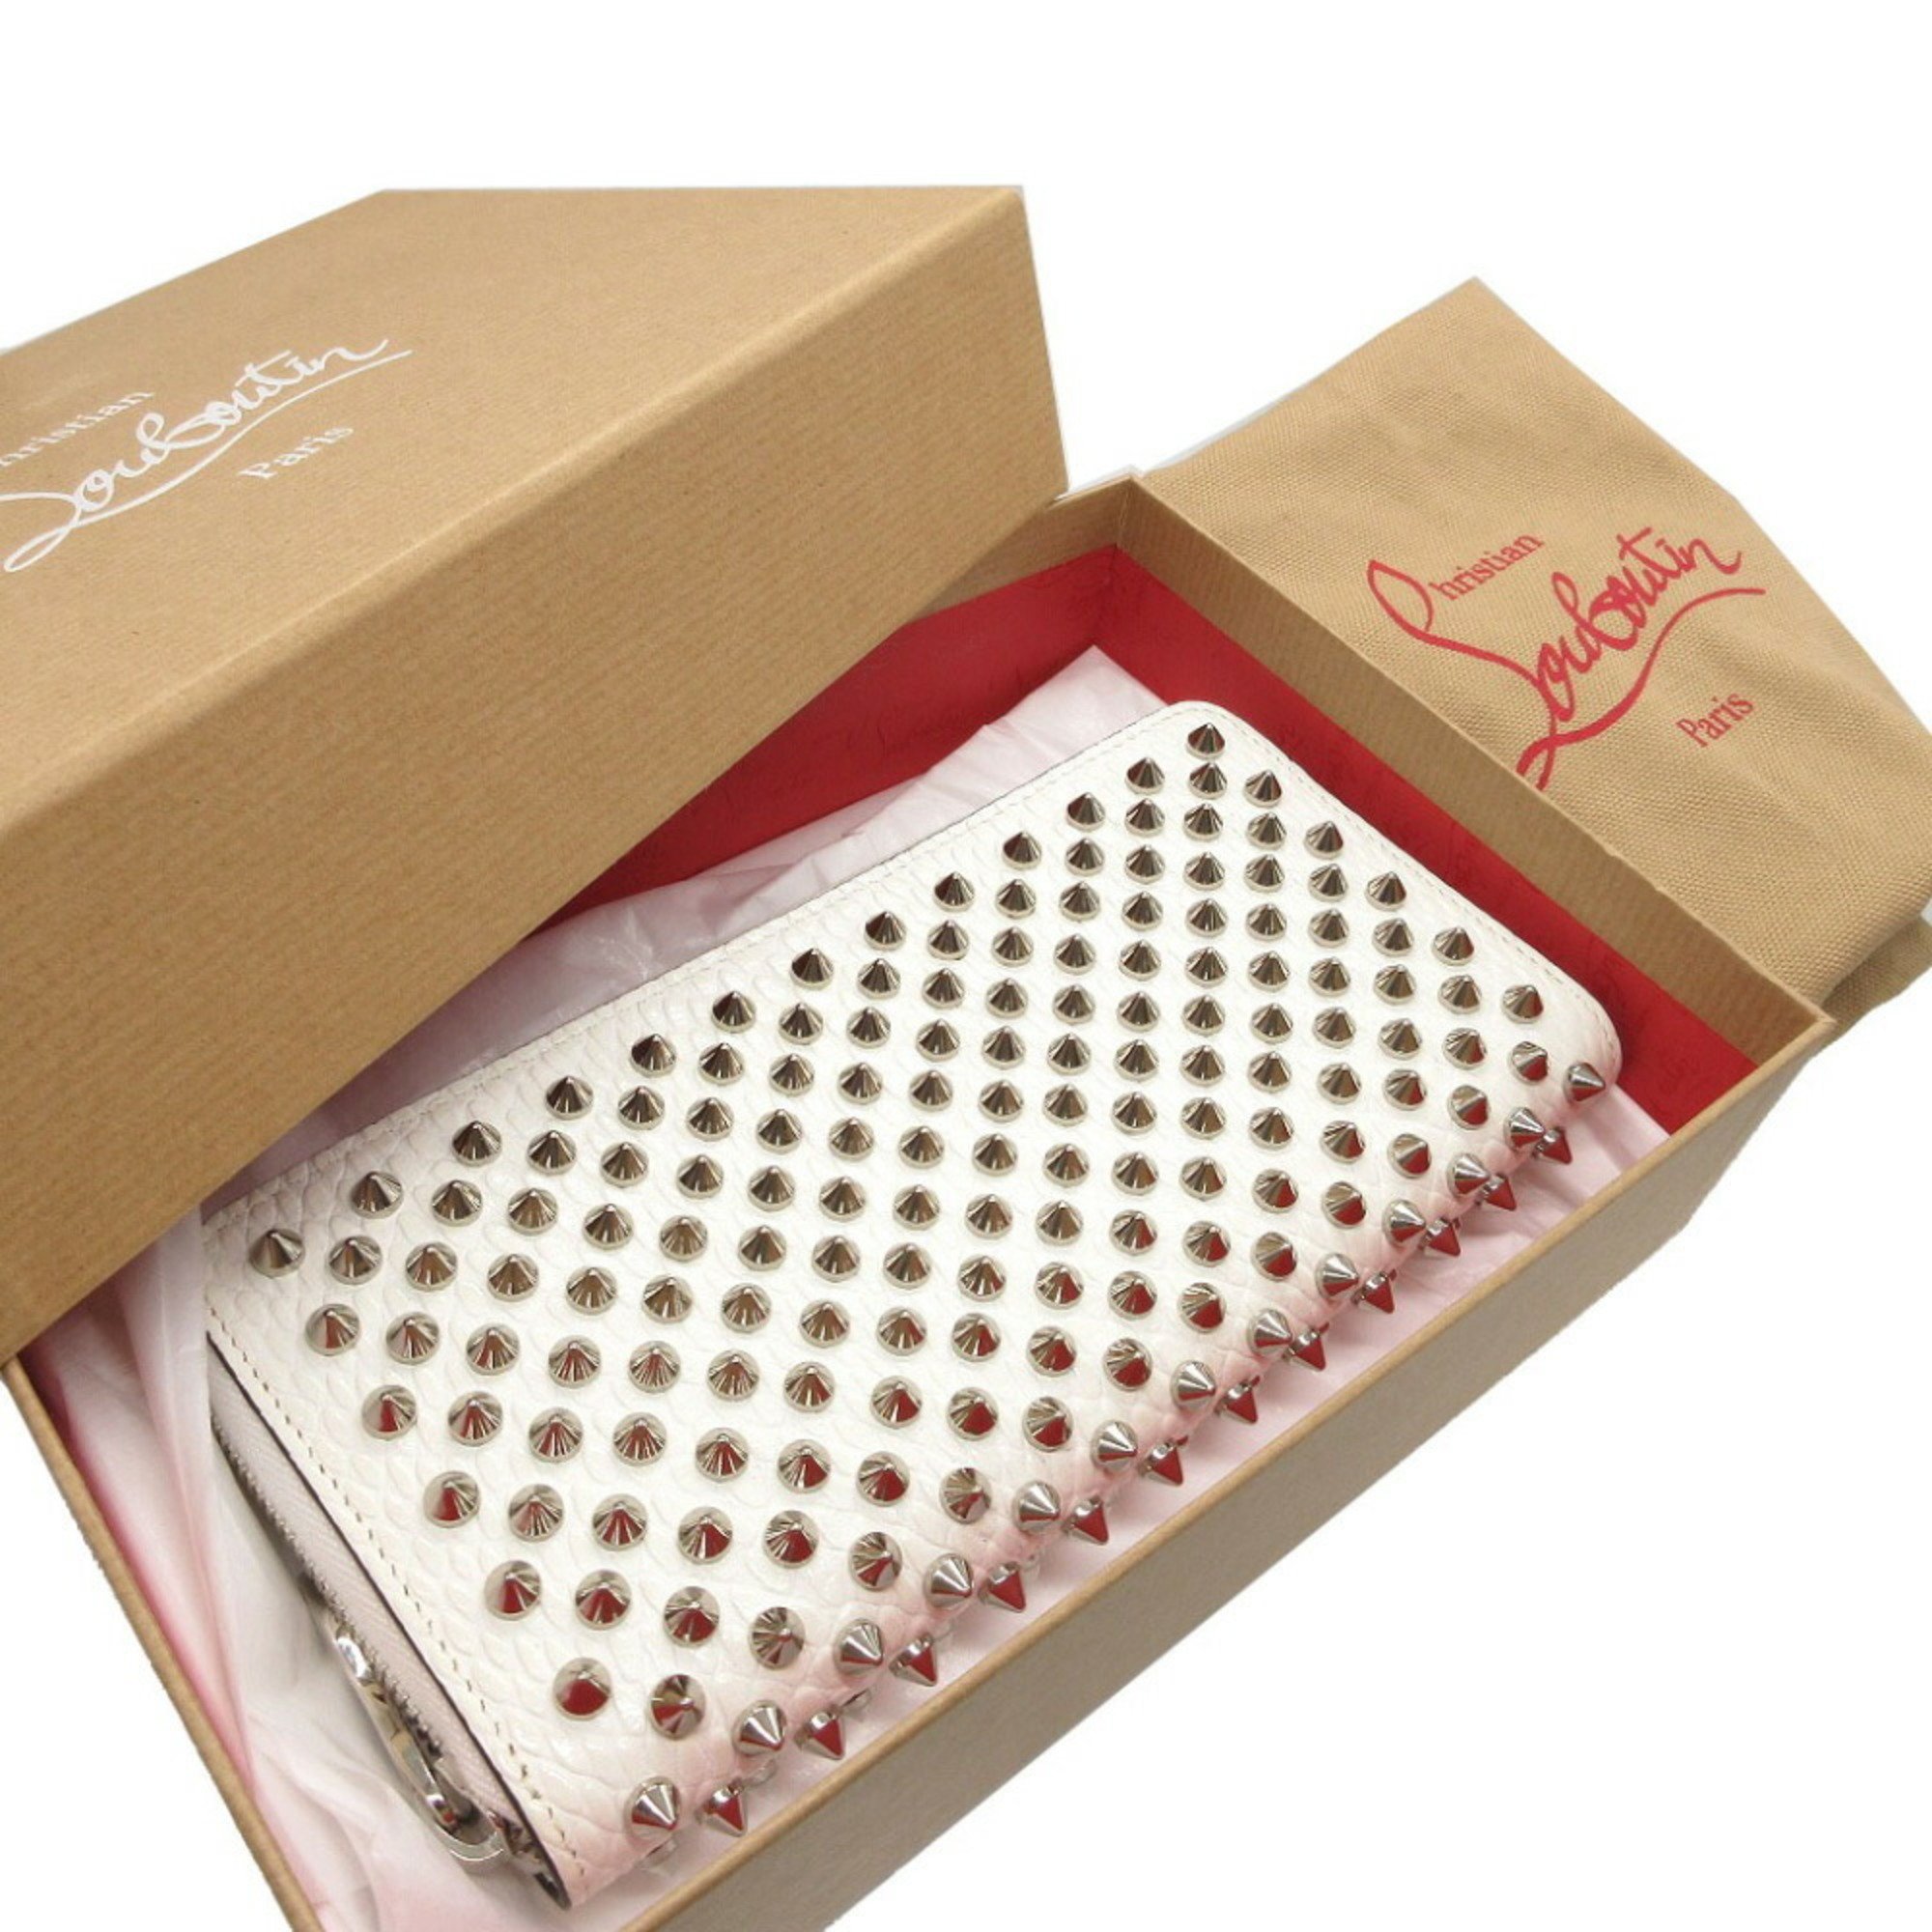 Christian Louboutin Studded Embossed Leather White Round Long Wallet 0105Christian 6B0105ZZL5